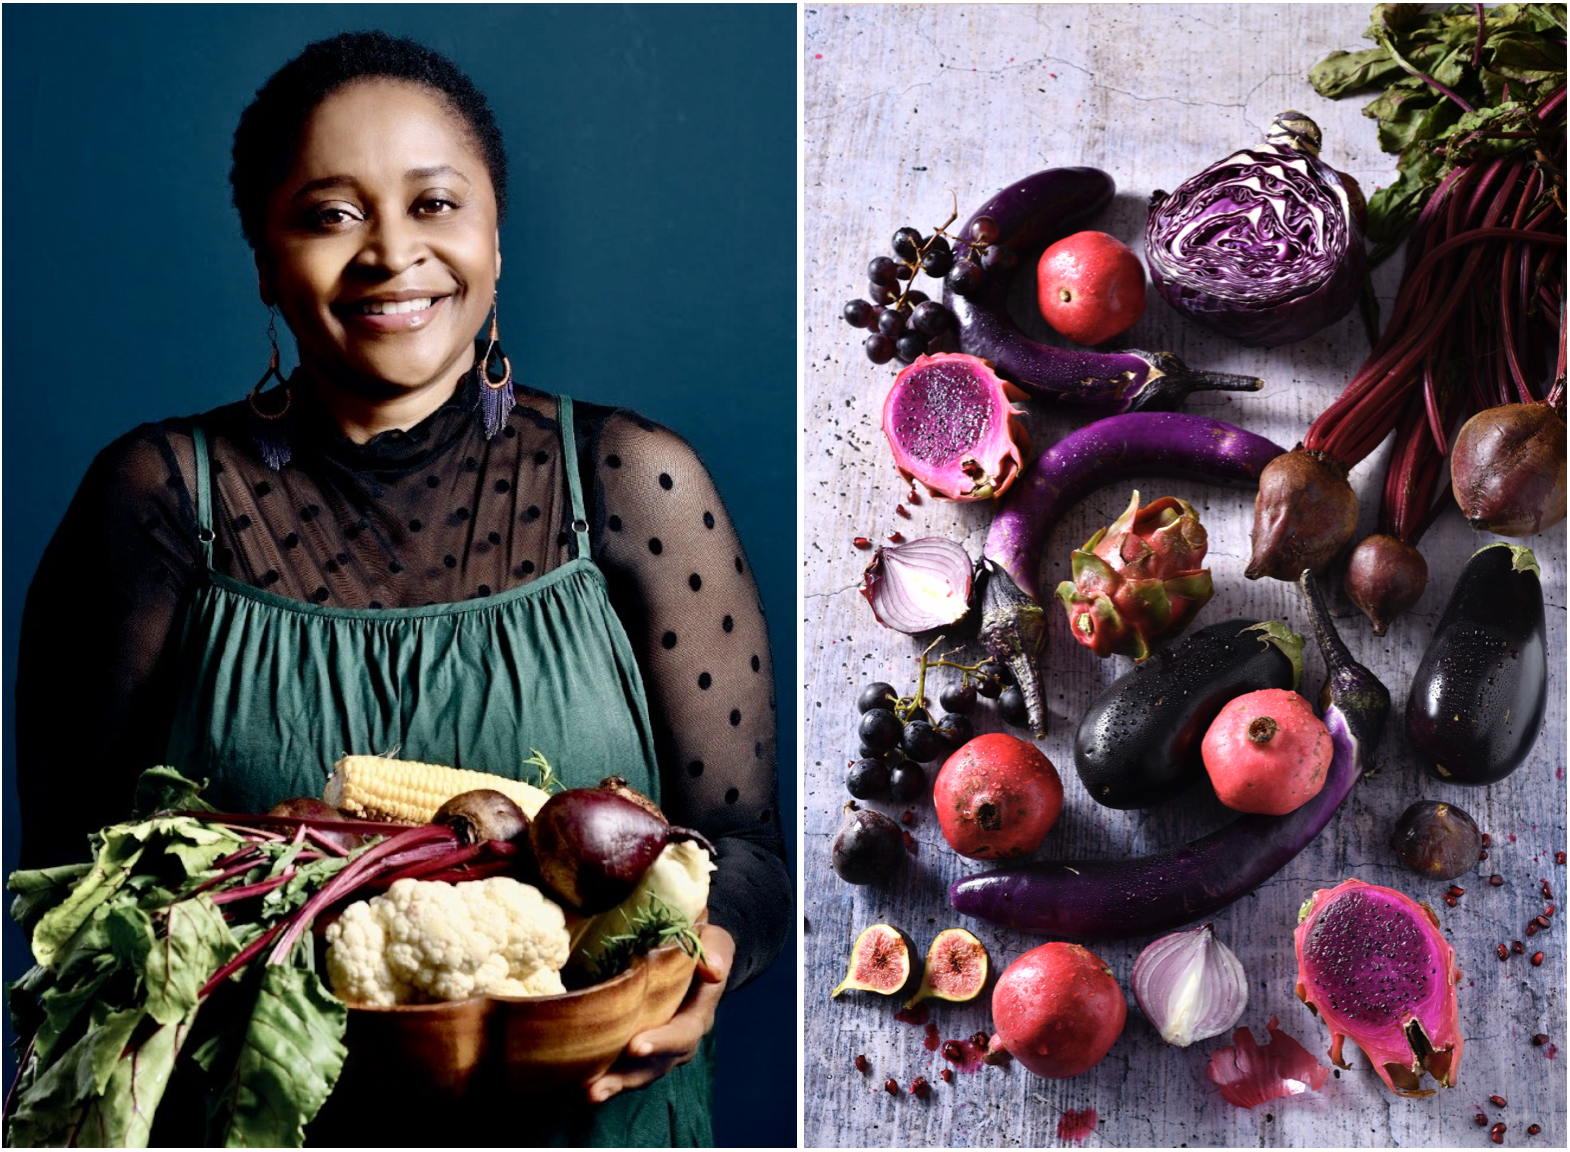 GEARING UP FOR WINTER – WITH MOKGADI ITSWENG’S AUBERGINE PICKLE RECIPE